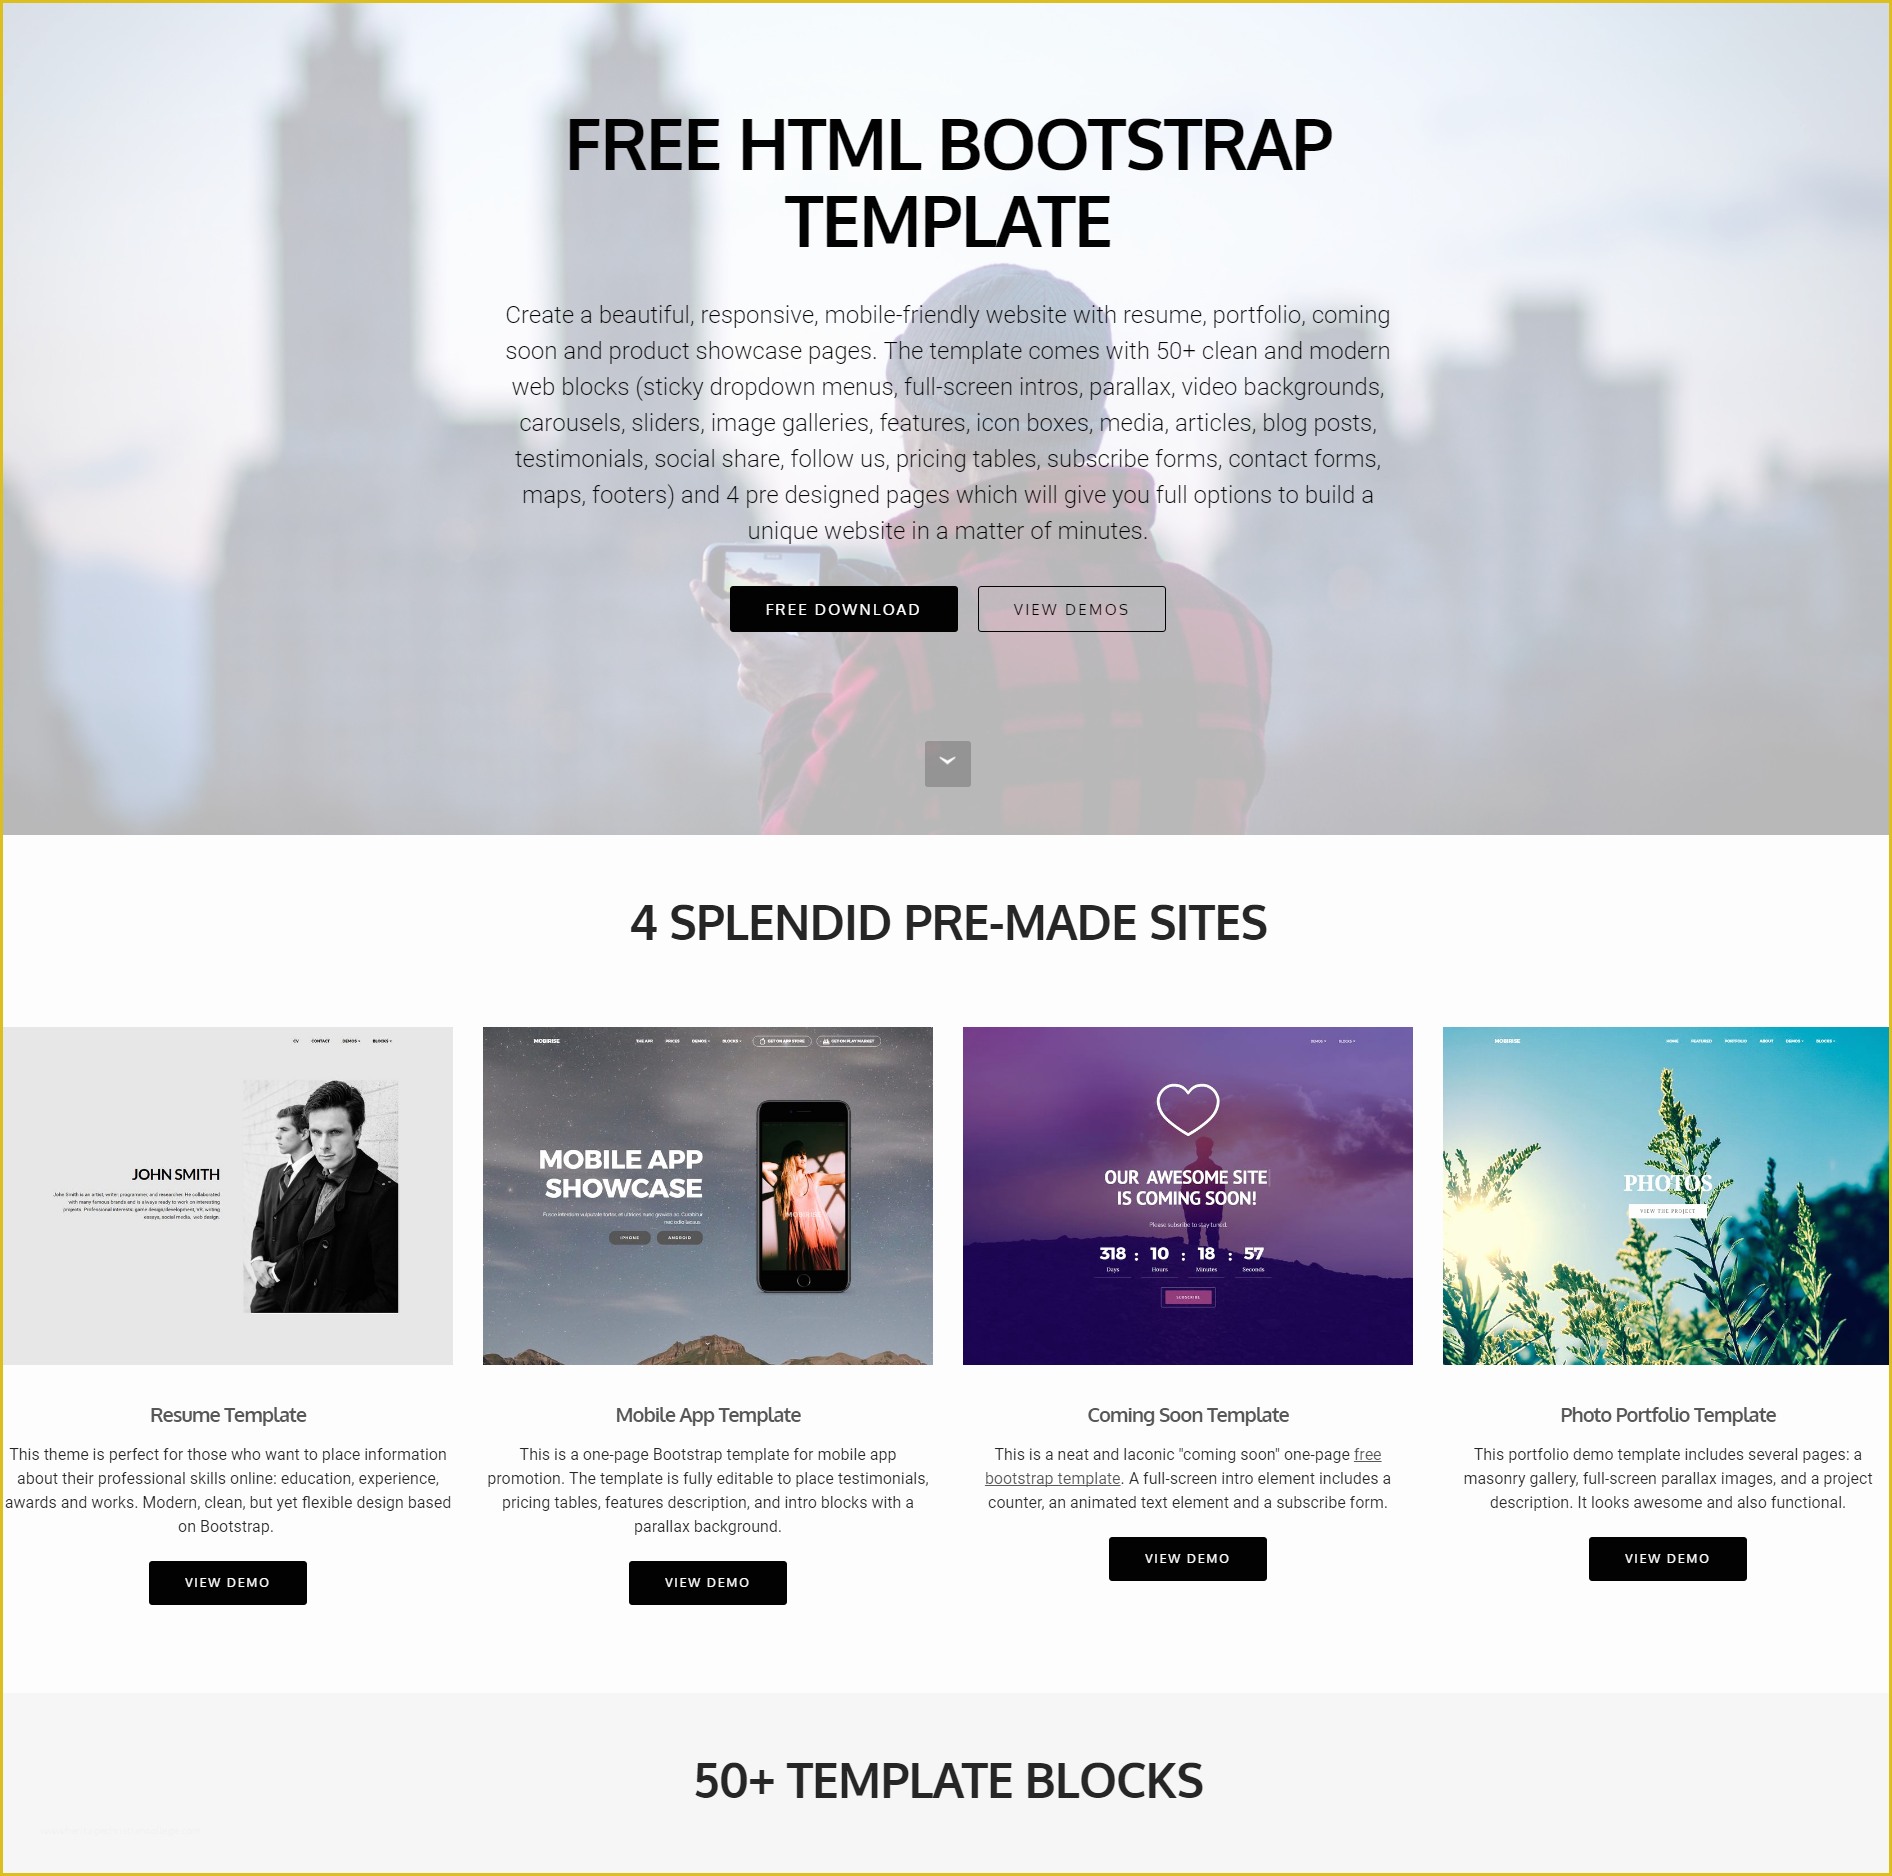 Mobile Compatible Website Template Free Download Of 40 Killer Free HTML Bootstrap Templates 2019